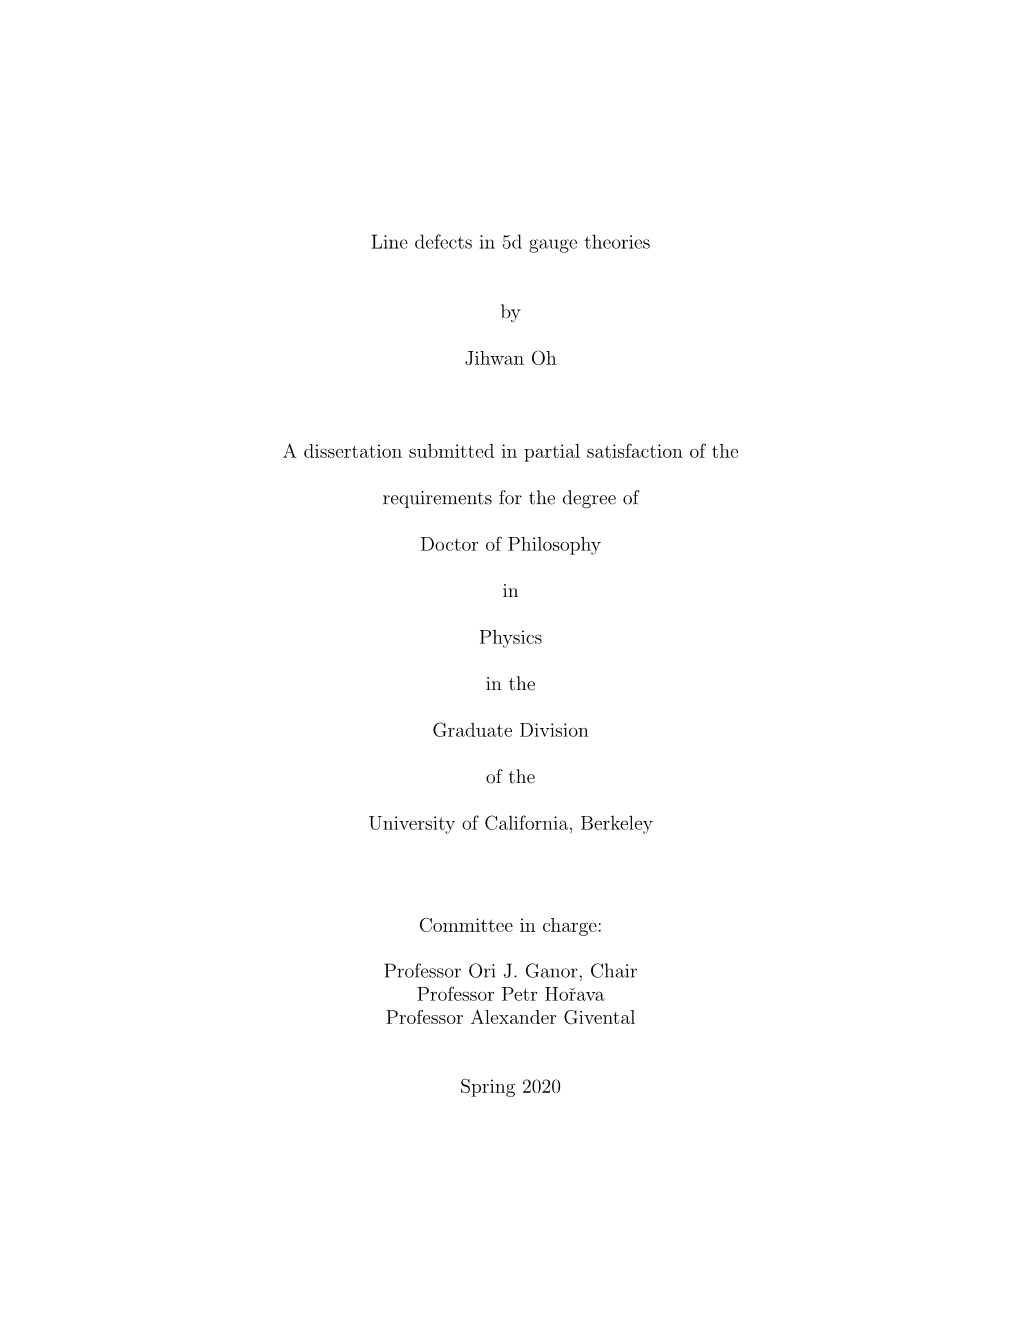 Line Defects in 5D Gauge Theories by Jihwan Oh a Dissertation Submitted